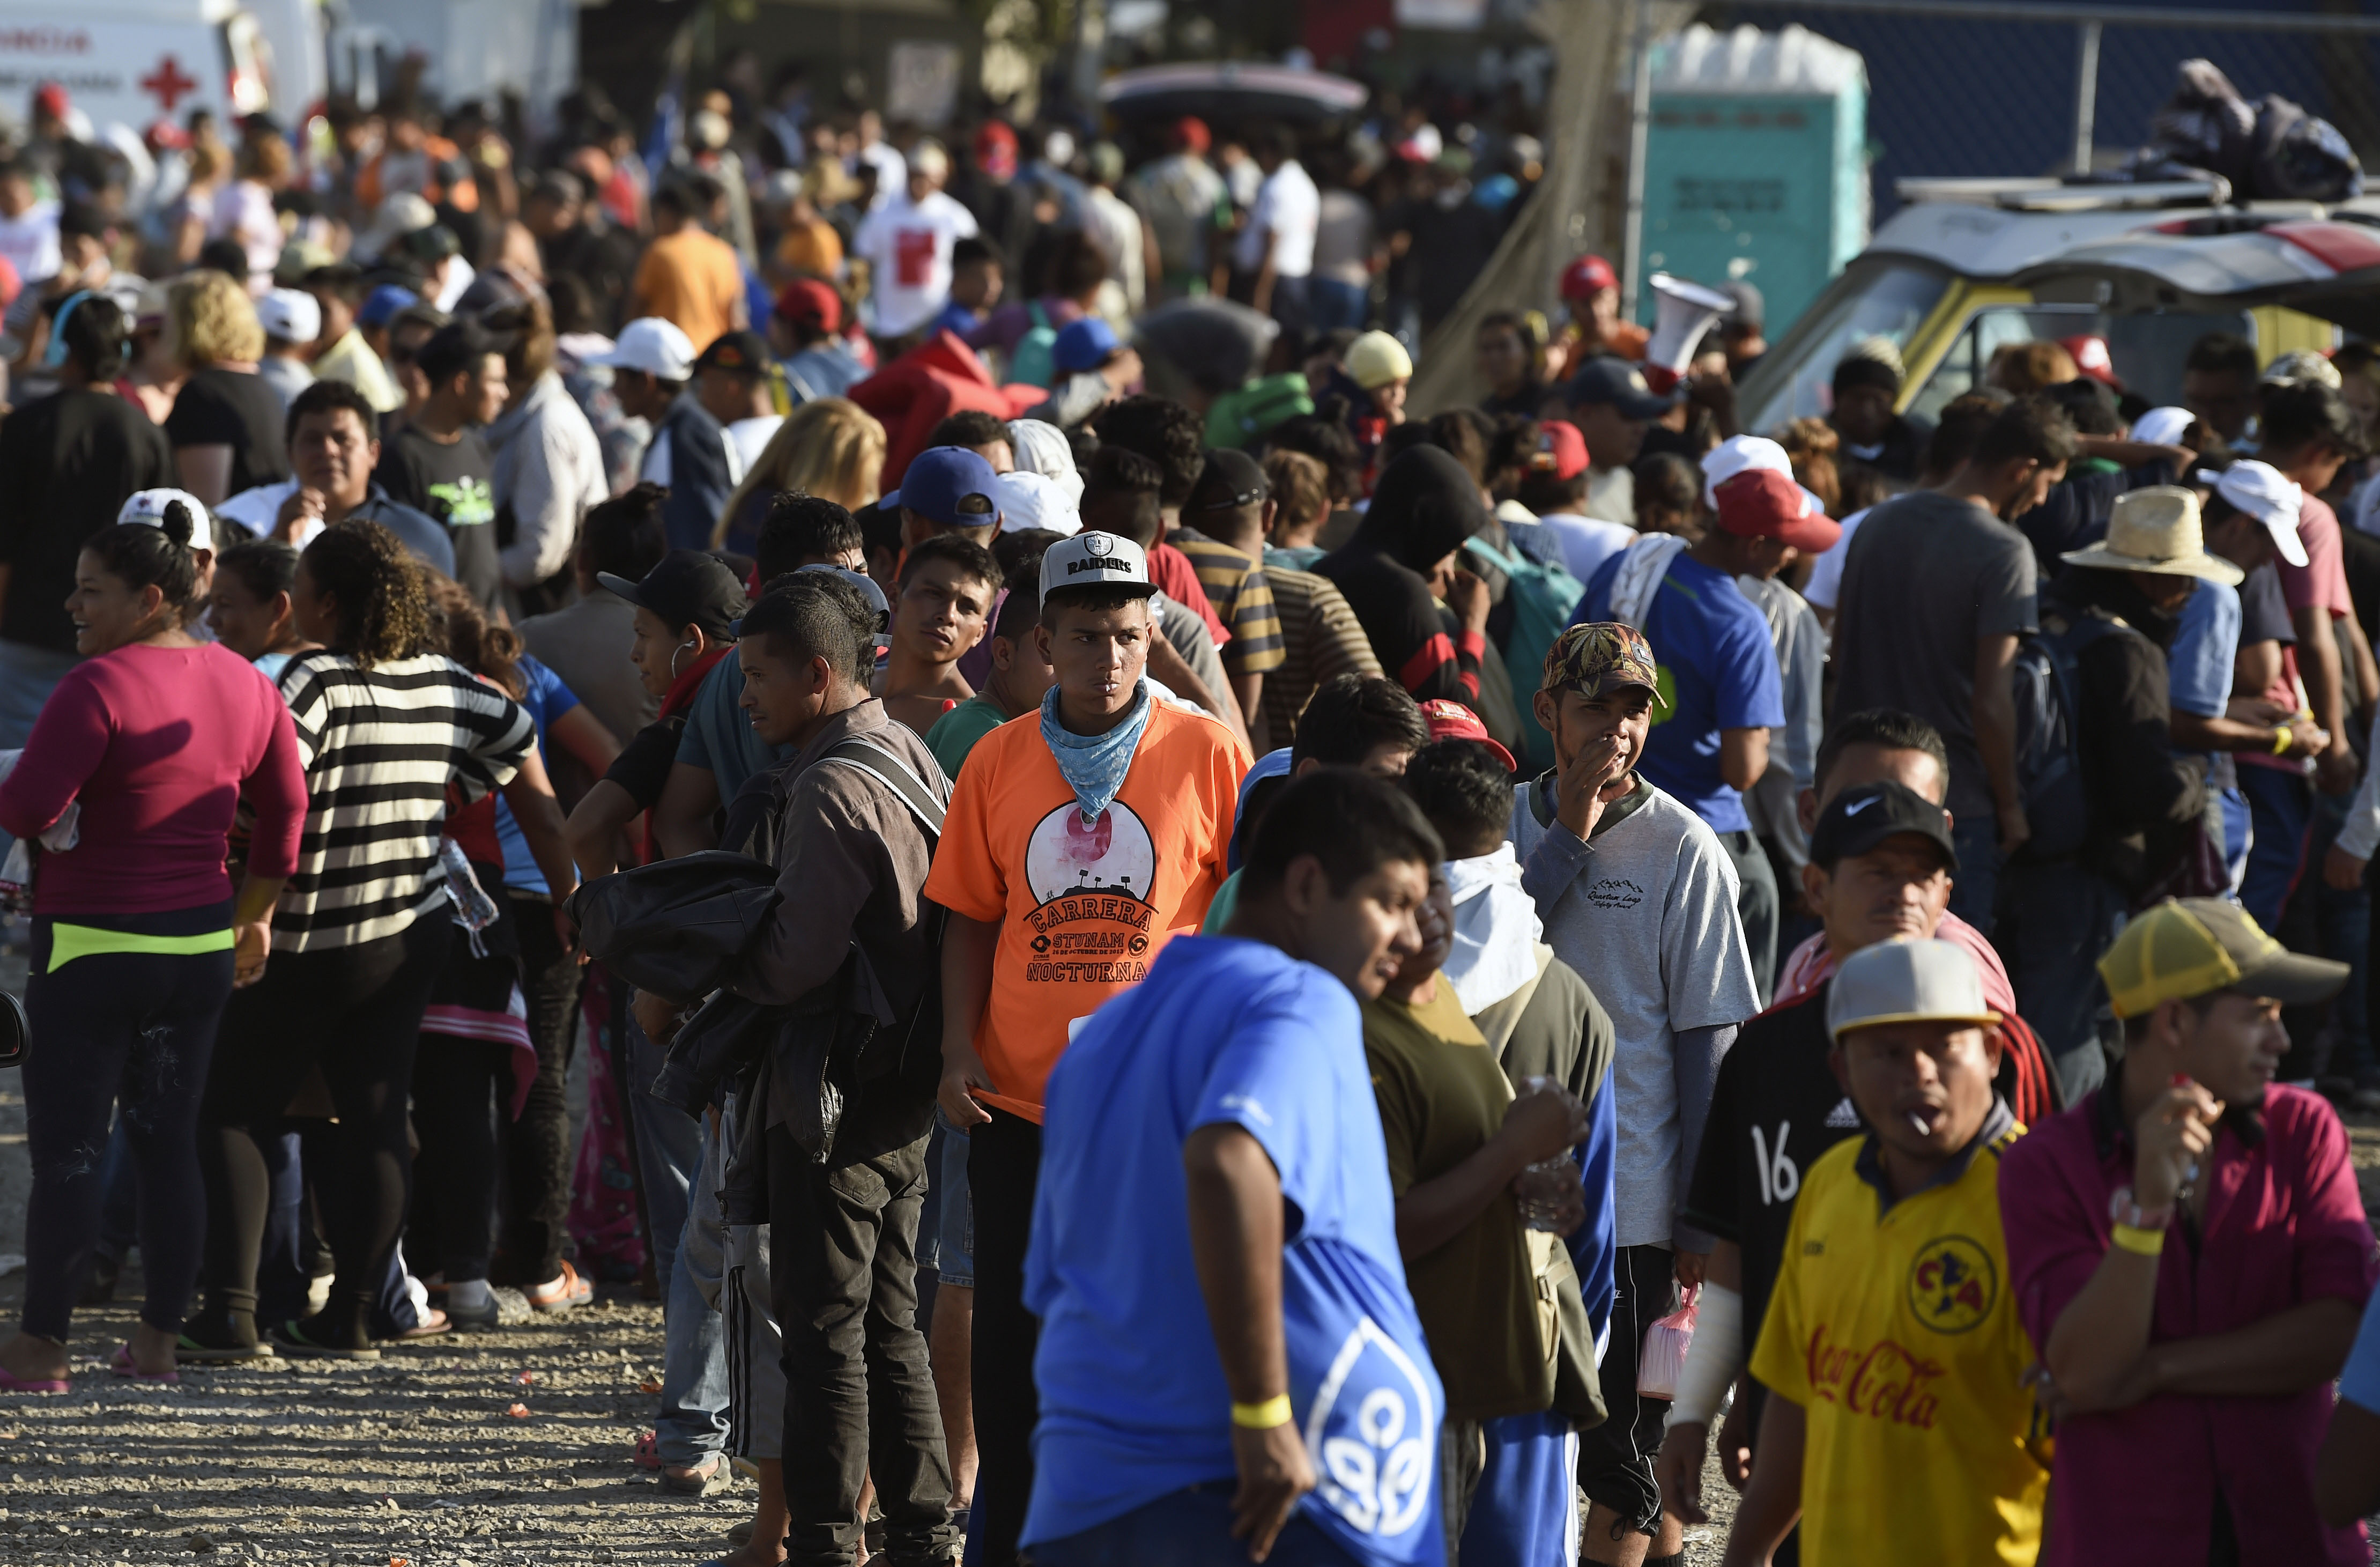 Central American migrants, taking part in a caravan heading to the US, queue to receive a meal at a temporary shelter in Irapuato, Guanajuato state, Mexico on November 11, 2018. (Photo by ALFREDO ESTRELLA / AFP) (Photo credit should read ALFREDO ESTRELLA/AFP/Getty Images)